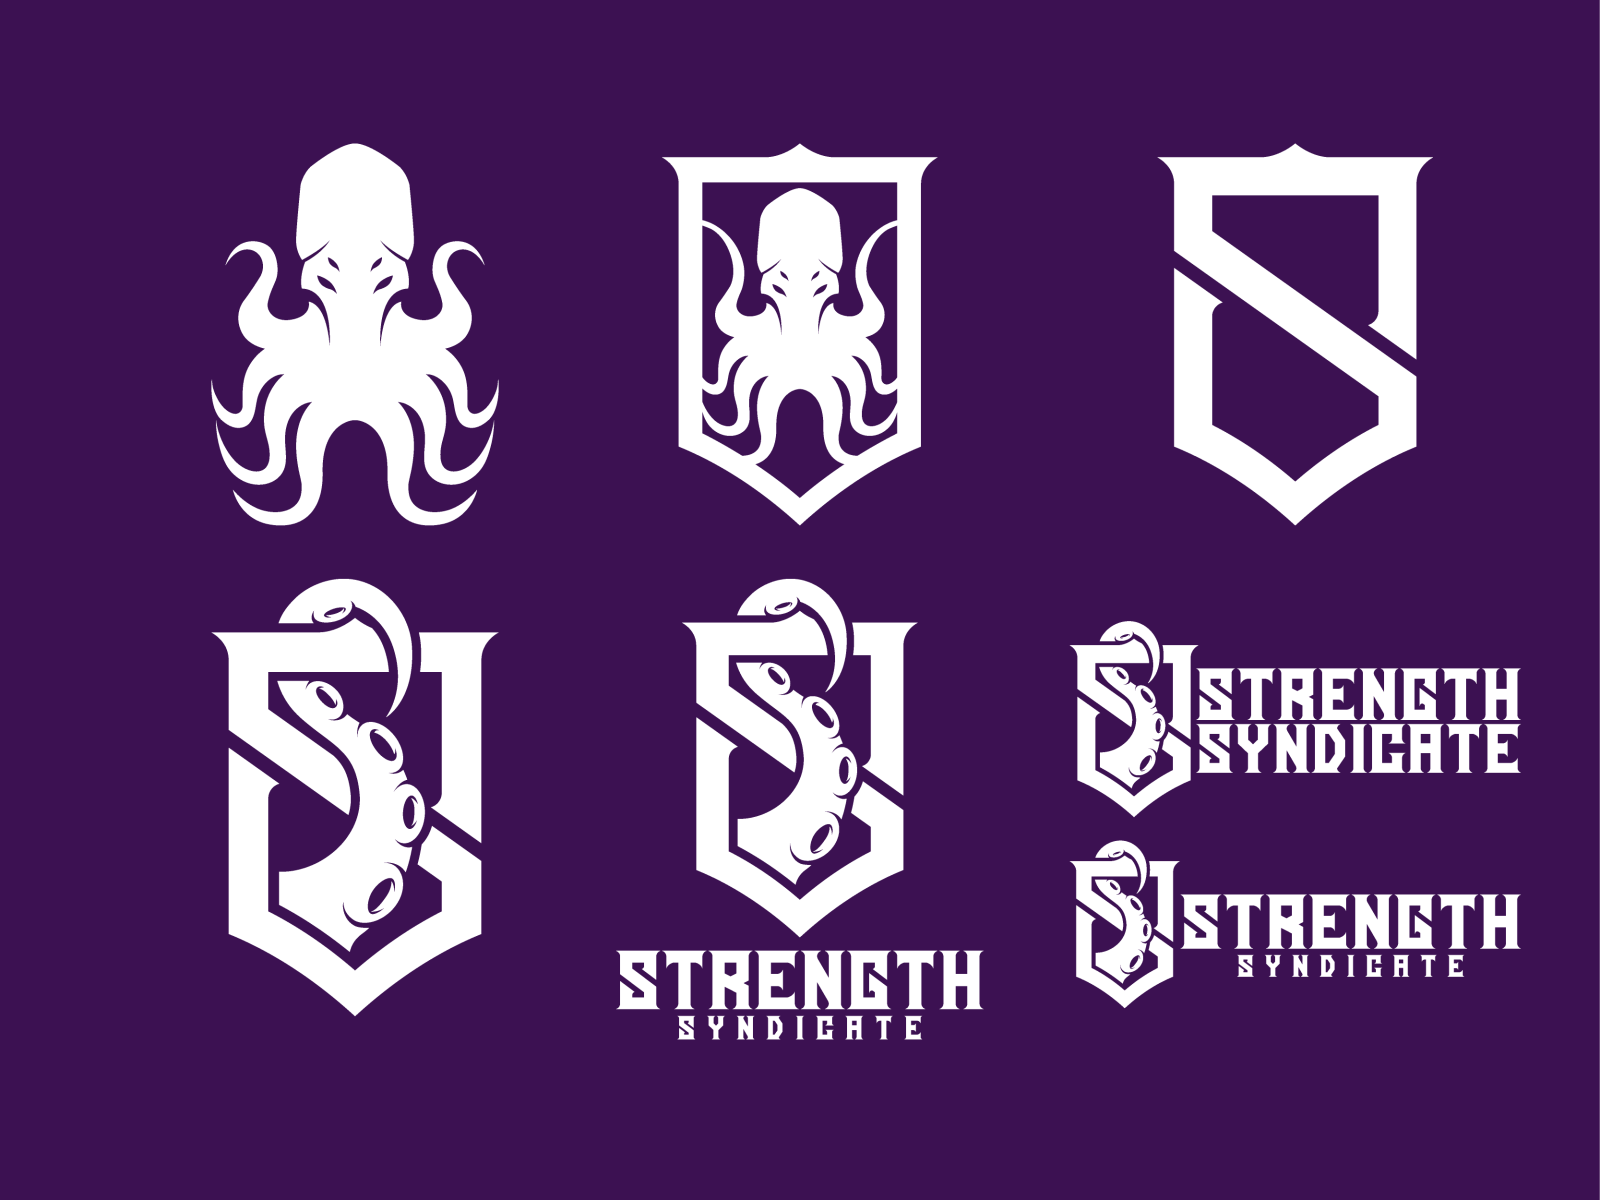 Design meaningful syndicate logo with free revisions and vector file by  Edwardsjohnso06 | Fiverr